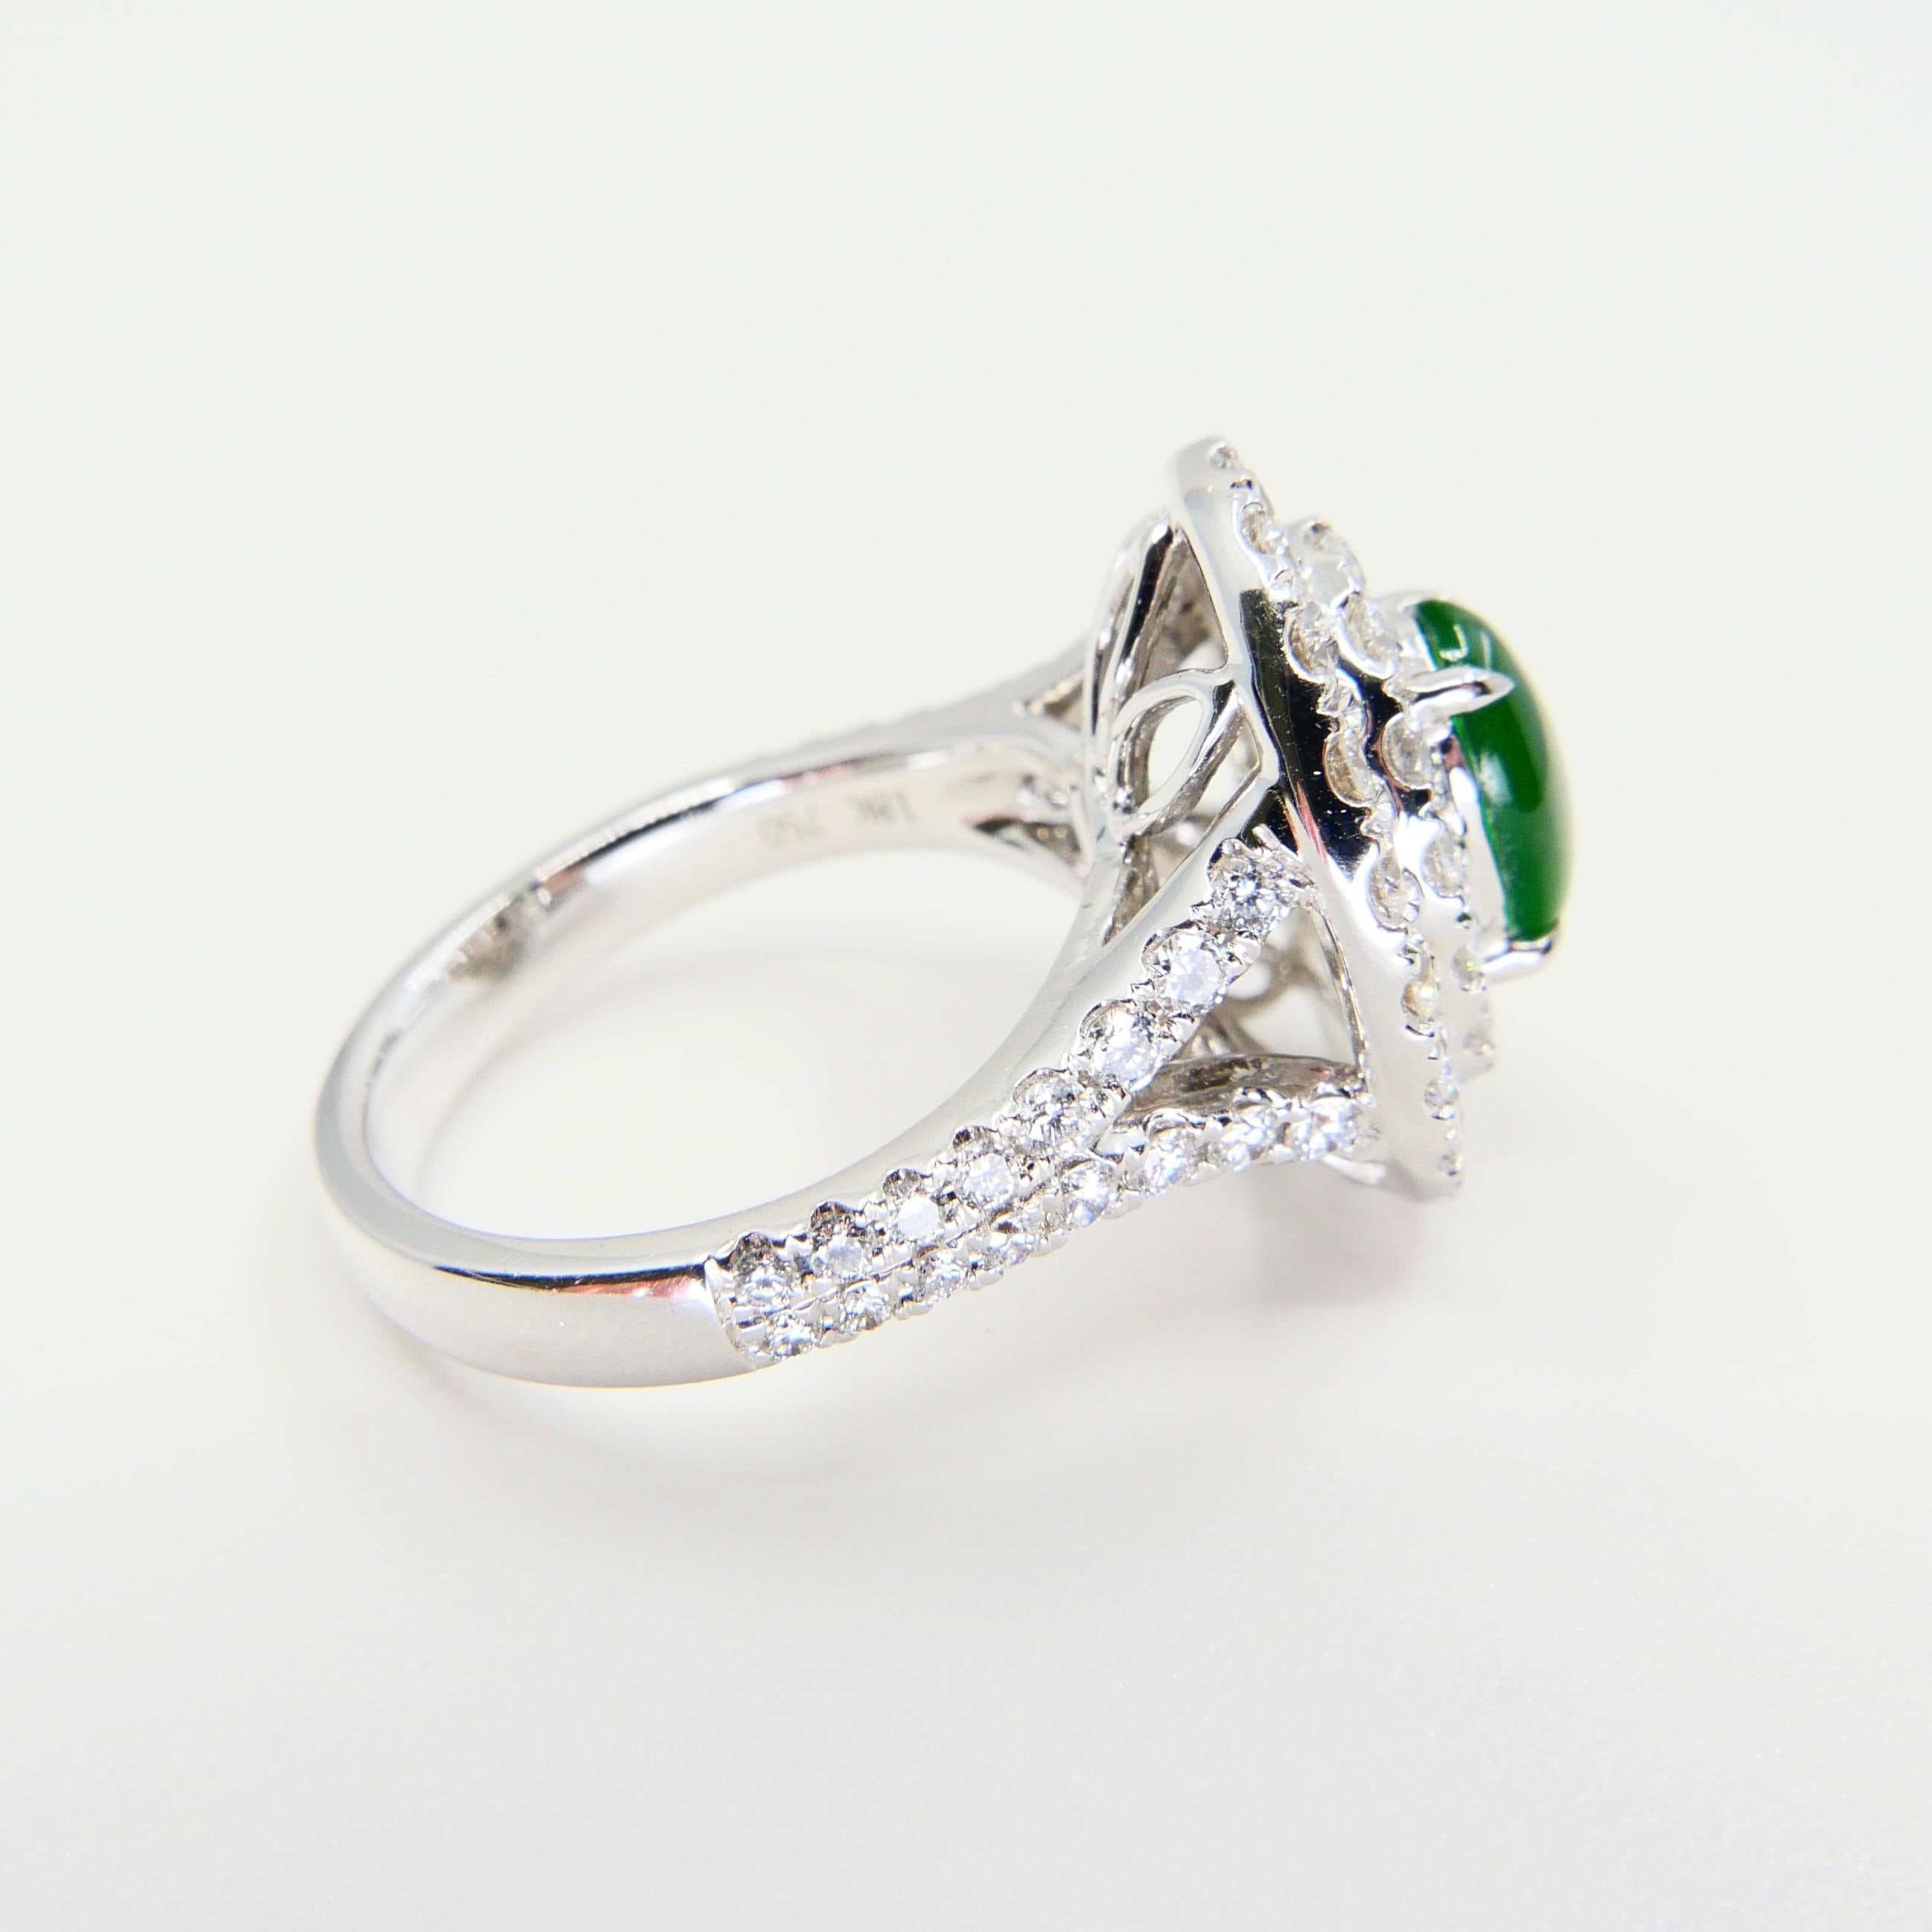 Certified Type A Jadeite Jade and Diamond Cocktail Ring, Close to Imperial Jade 7